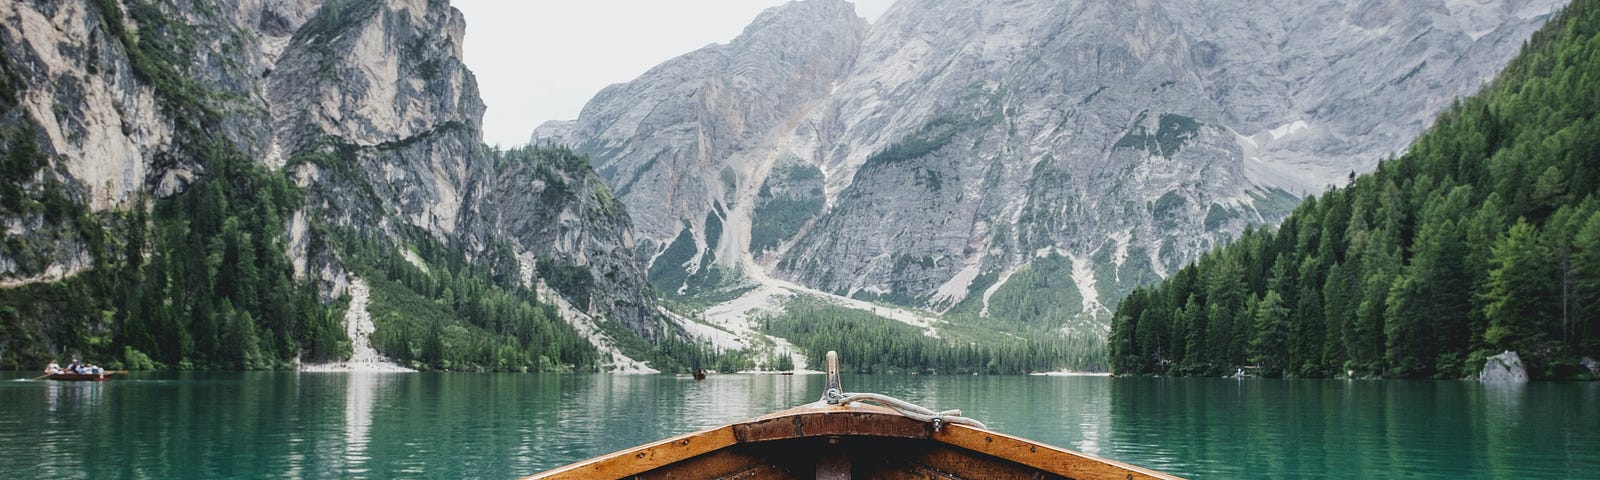 A wooden boat floating in green waters facing a beautiful mountain